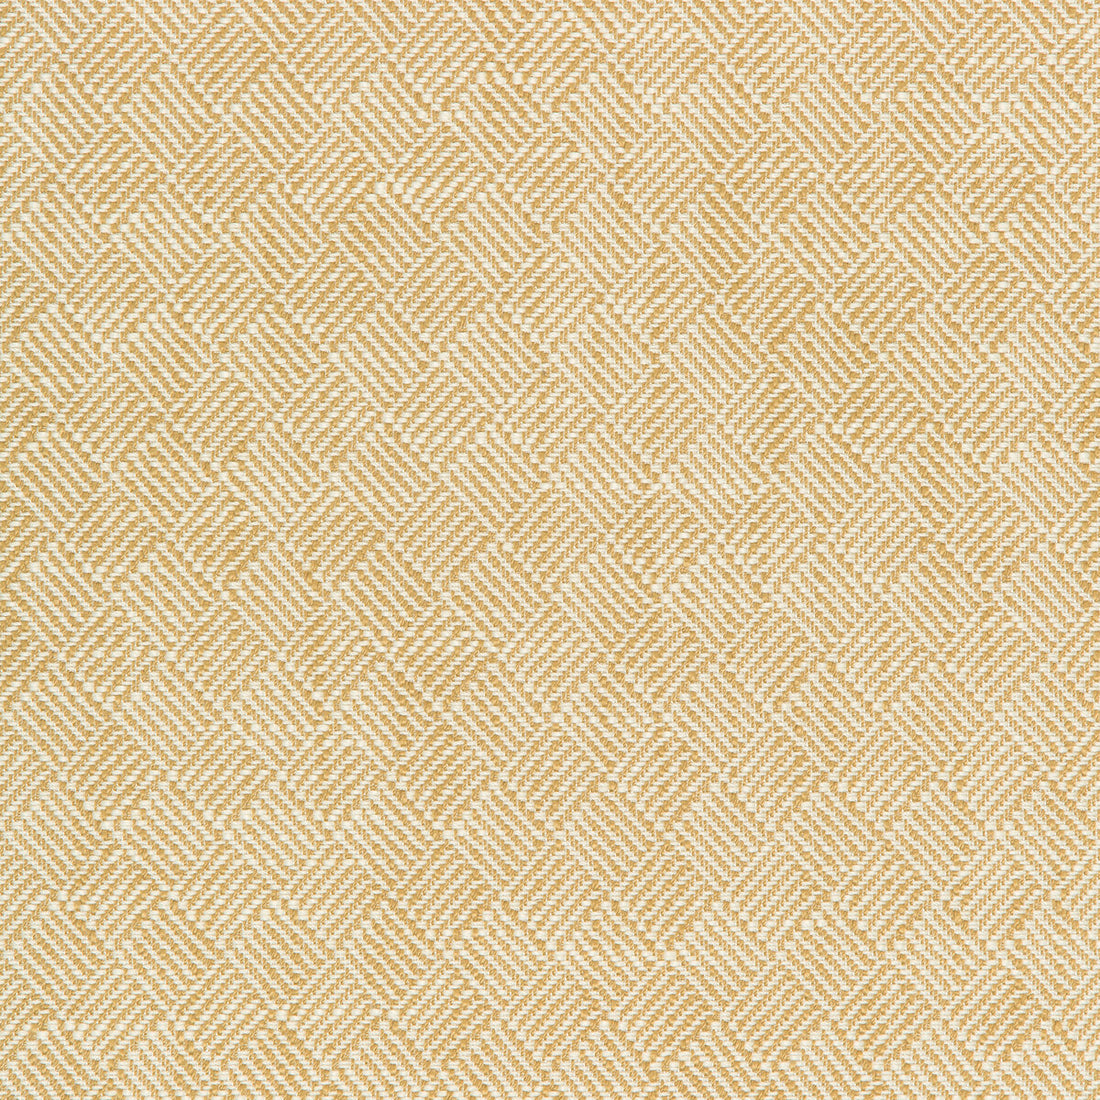 Kravet Design fabric in 36088-16 color - pattern 36088.16.0 - by Kravet Design in the Inside Out Performance Fabrics collection